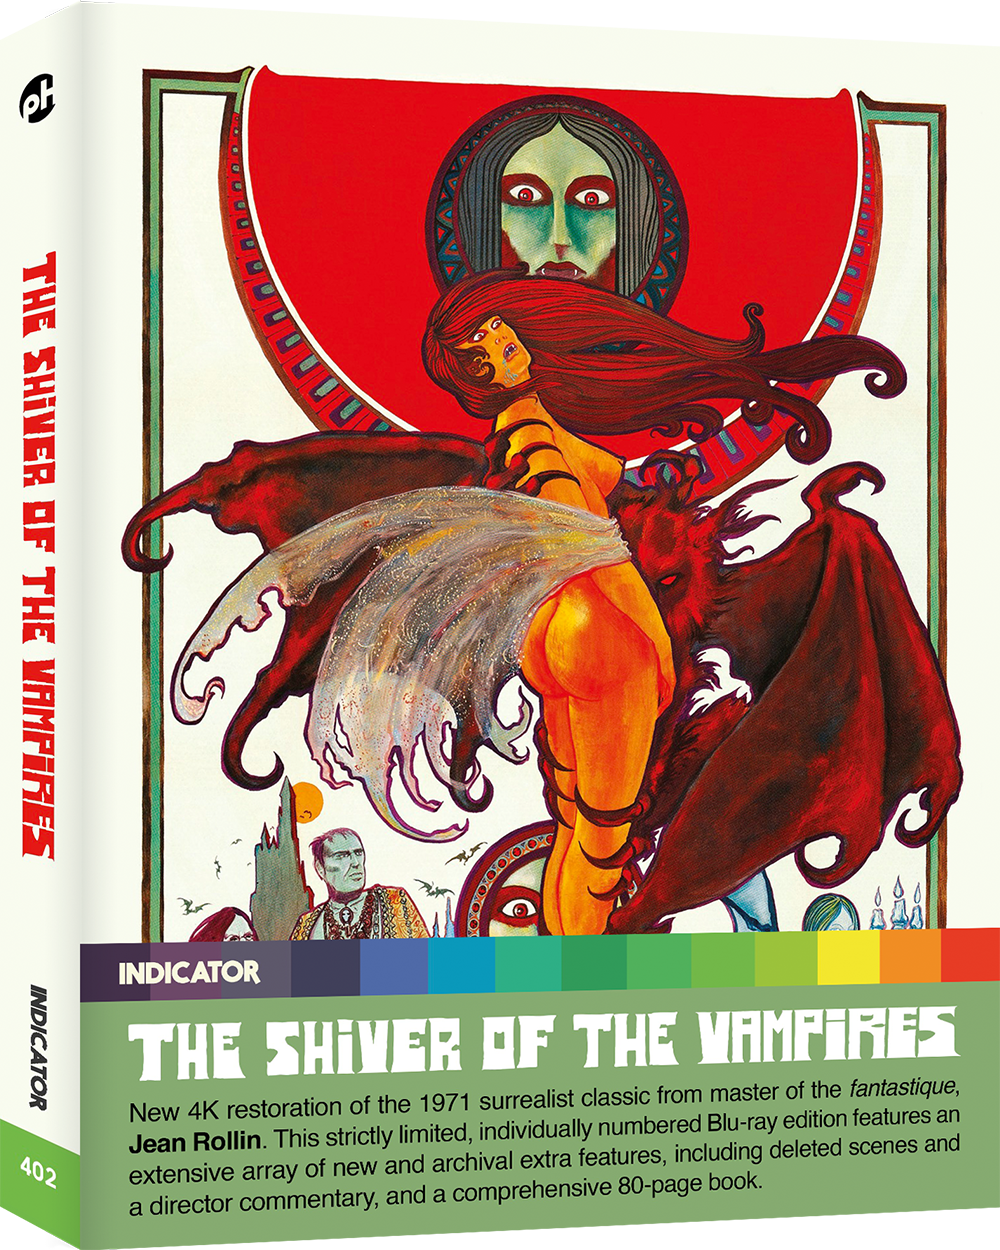 THE SHIVER OF THE VAMPIRES - Blu-ray LE [US]